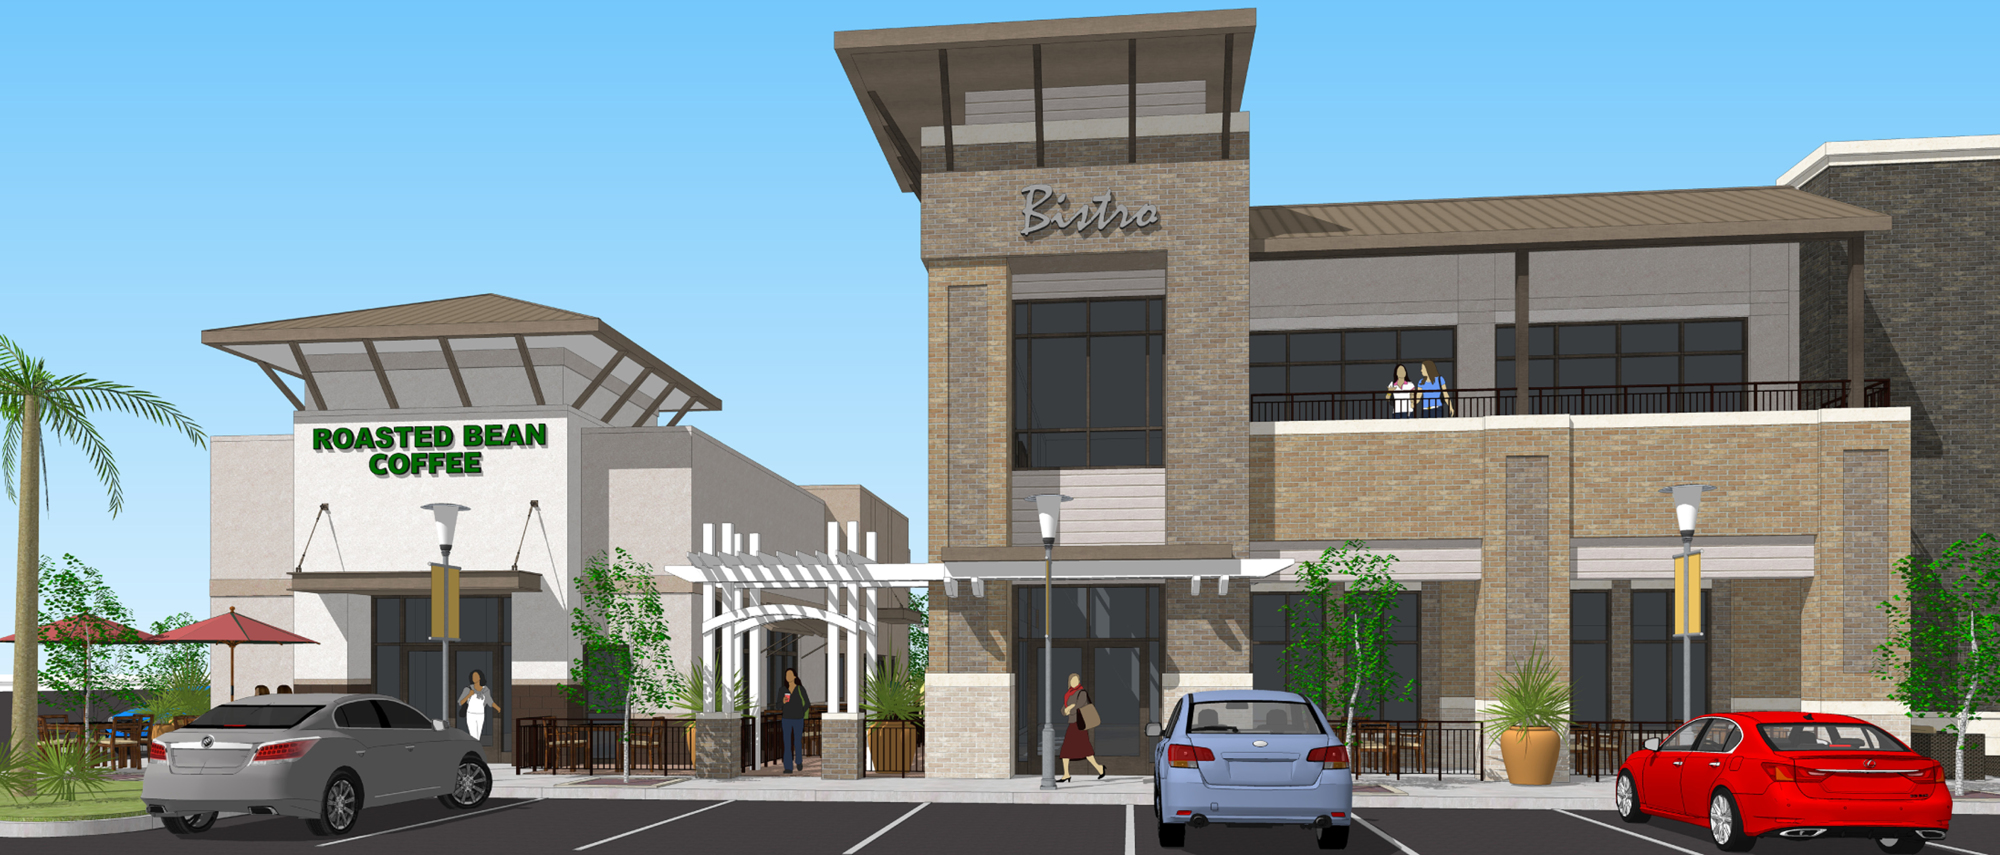 A rendering of buildings No. 1 and No. 2 shows a coffee shop sign similar in design to Starbucks, but no details on stores coming to the development have been released. The site plan shows four buildings and 315 parking spaces.